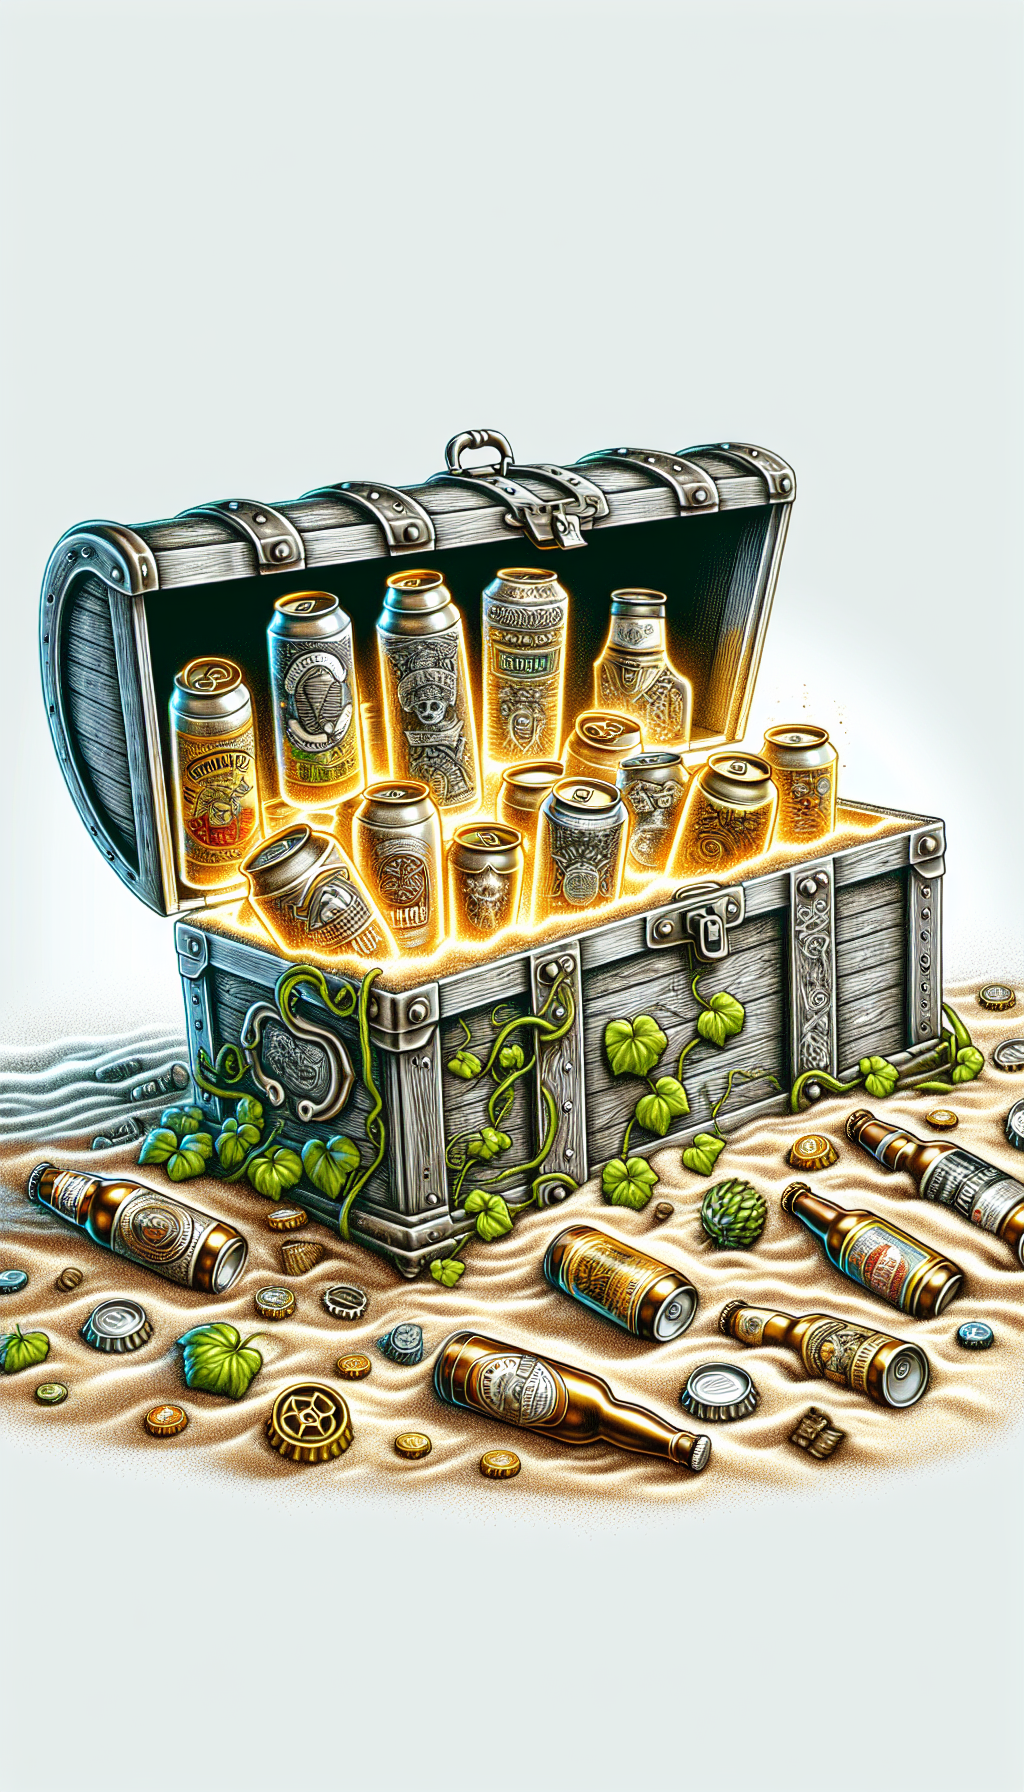 An illustration shows a vintage treasure chest half-buried in sand, brimming with luminescent, intricate old beer cans like precious artifacts, amidst forgotten bottle caps and hops vines. The cans are portrayed in various artistic styles - some in hyper-realism, others as abstract objects or cartoon-like - symbolizing their diverse historical value and collectability in the world of antique ales.